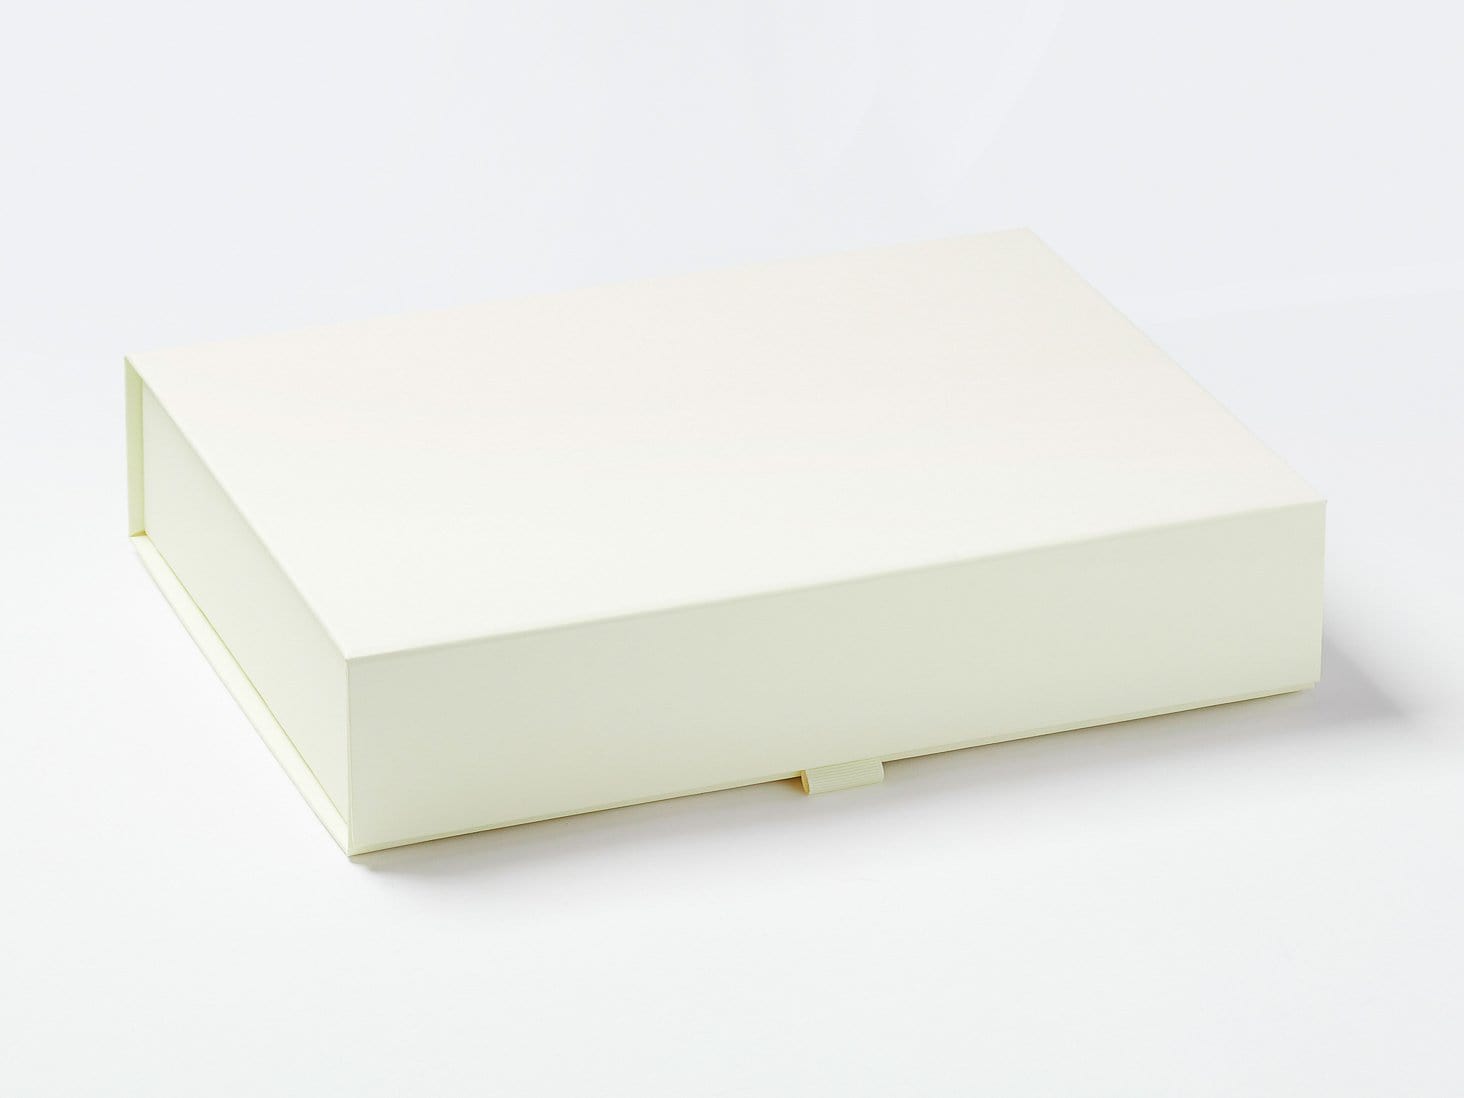 Ivory A4 Shallow Luxury Gift Boxes with Ribbon Loop